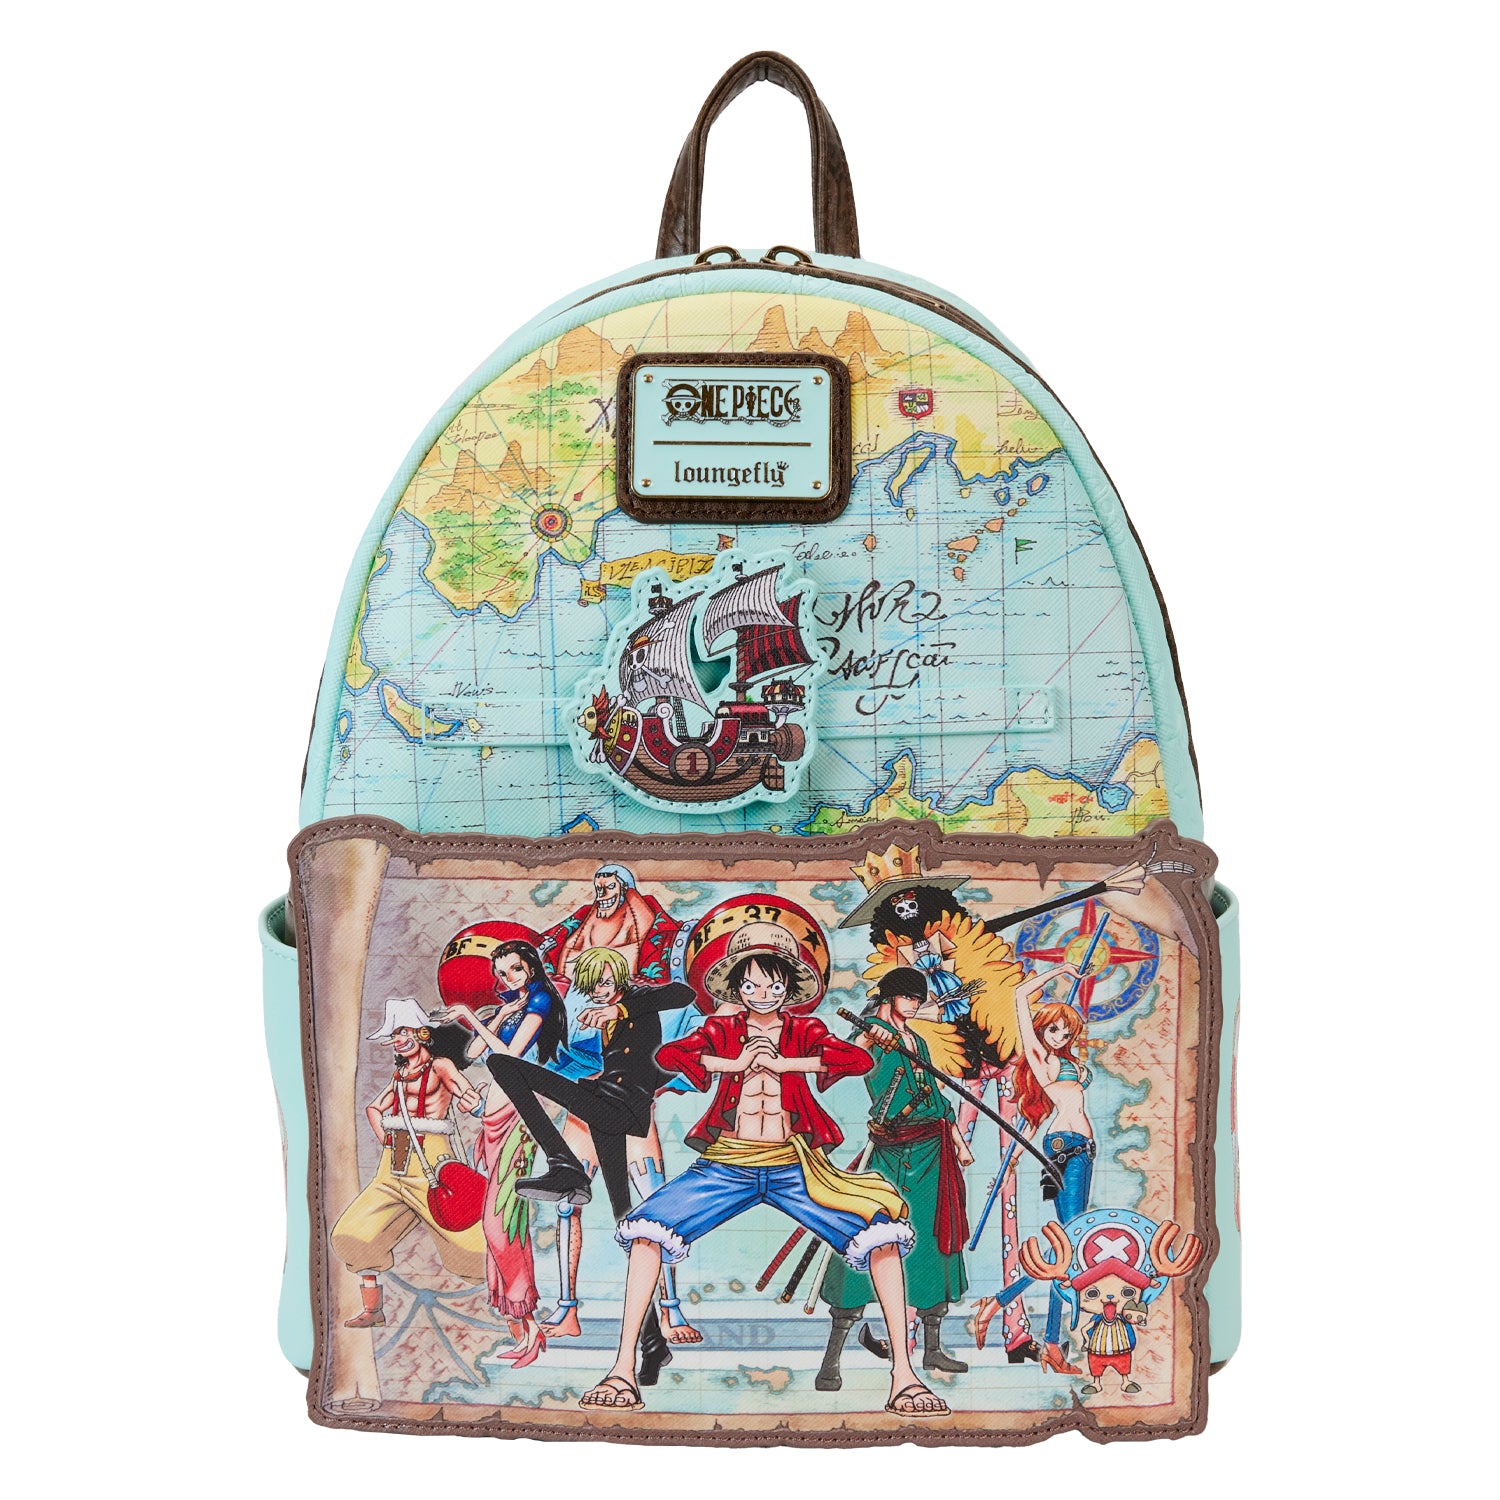 Loungefly Toei One Piece Luffy Gang Map Mini Backpack